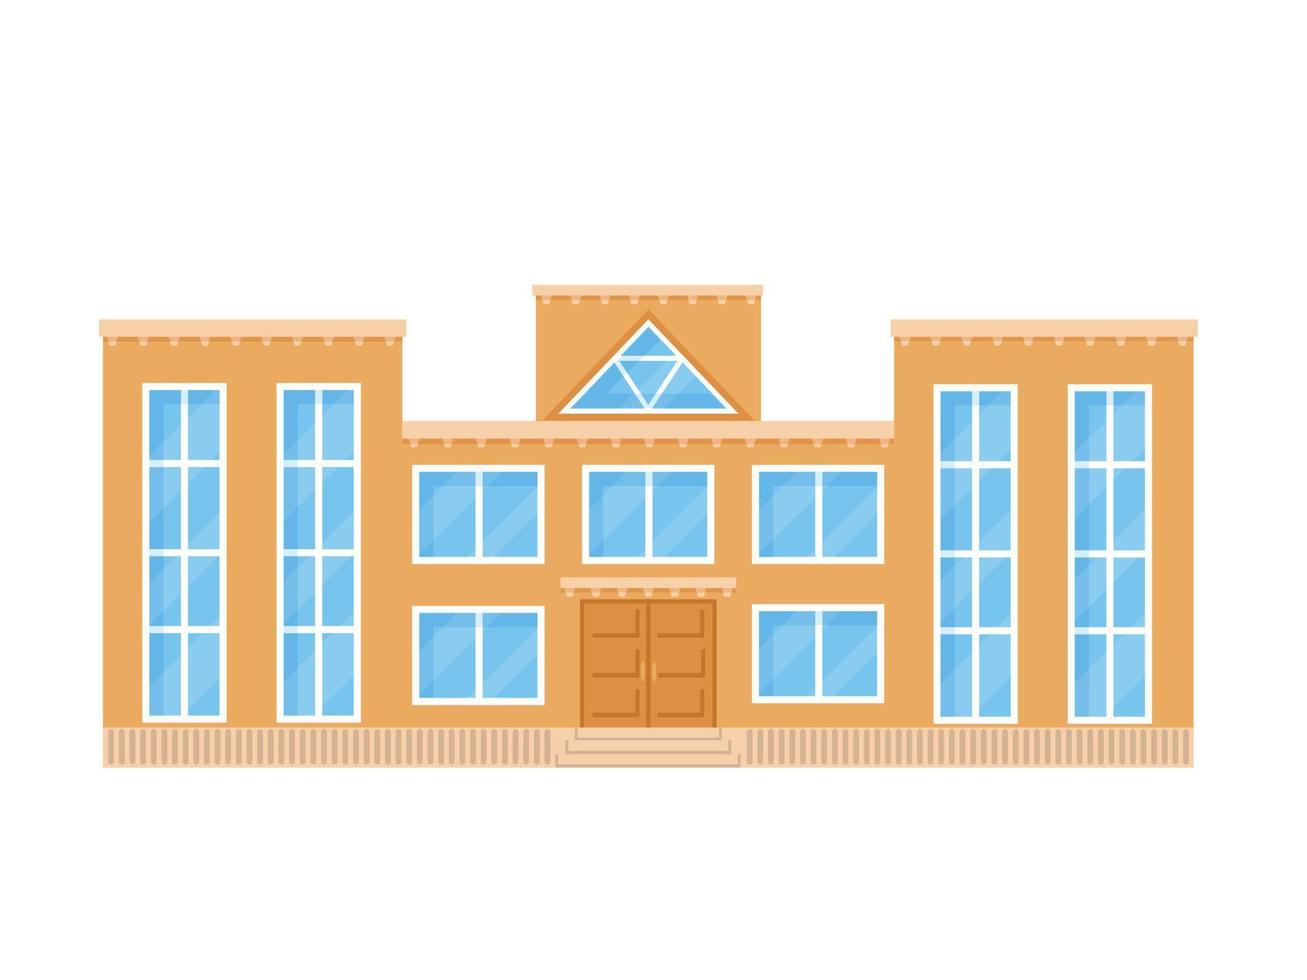 School building in flat style. Vector illustration isolated on white background.